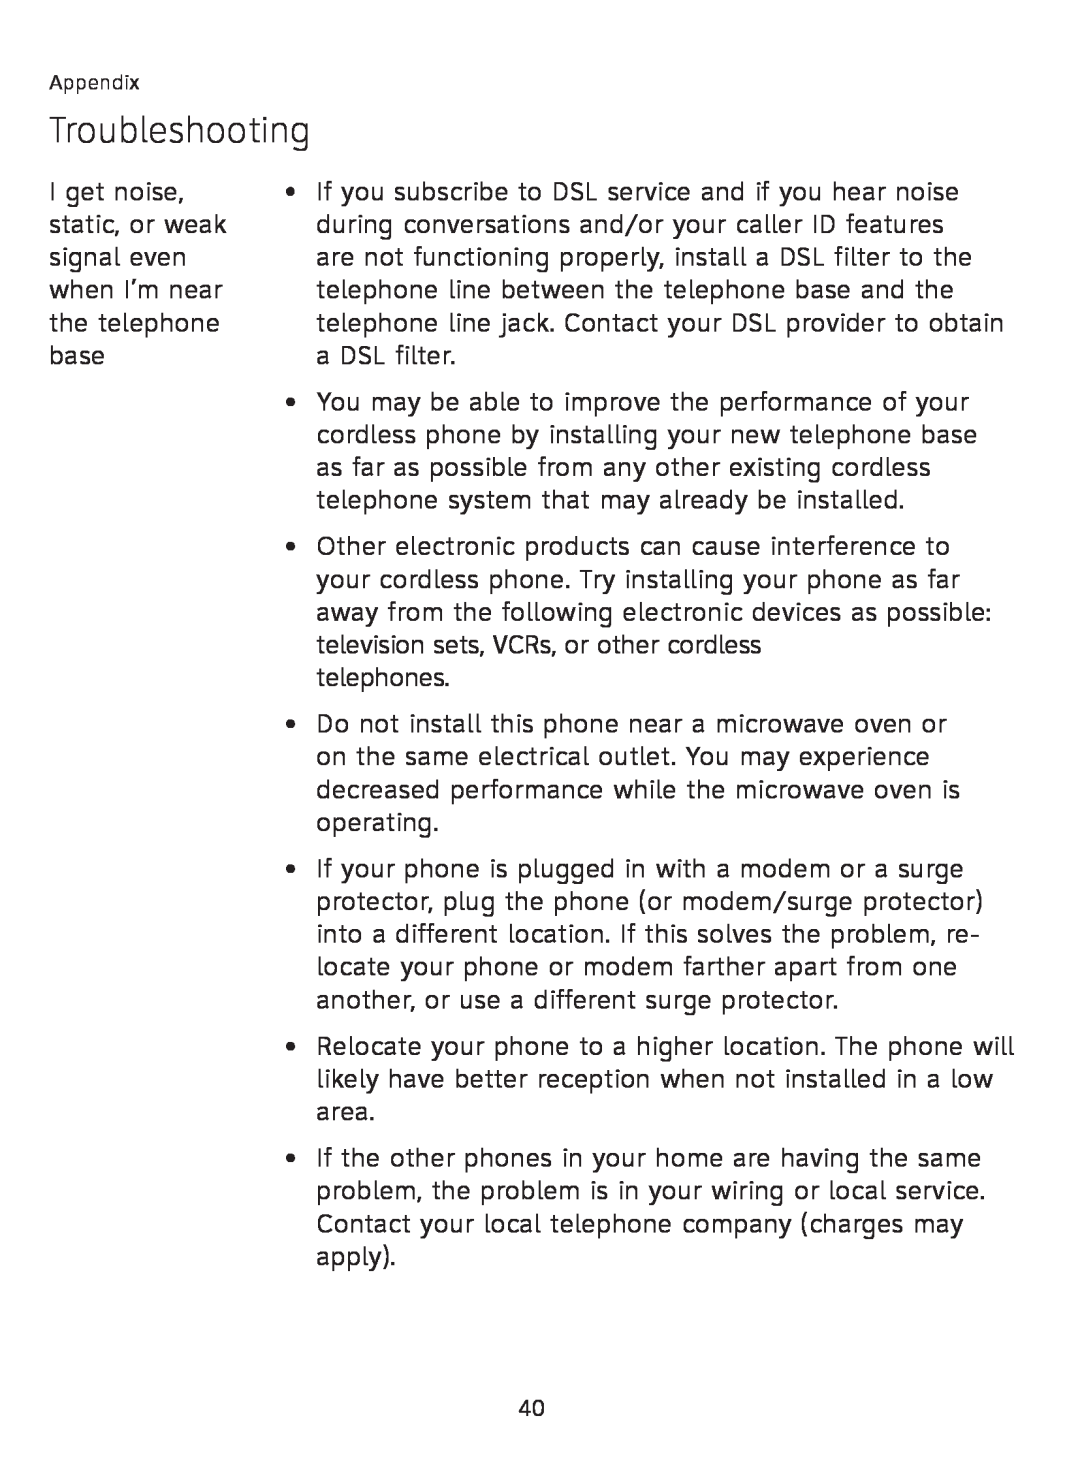 AT&T AT3111-2 user manual Troubleshooting, I get noise 